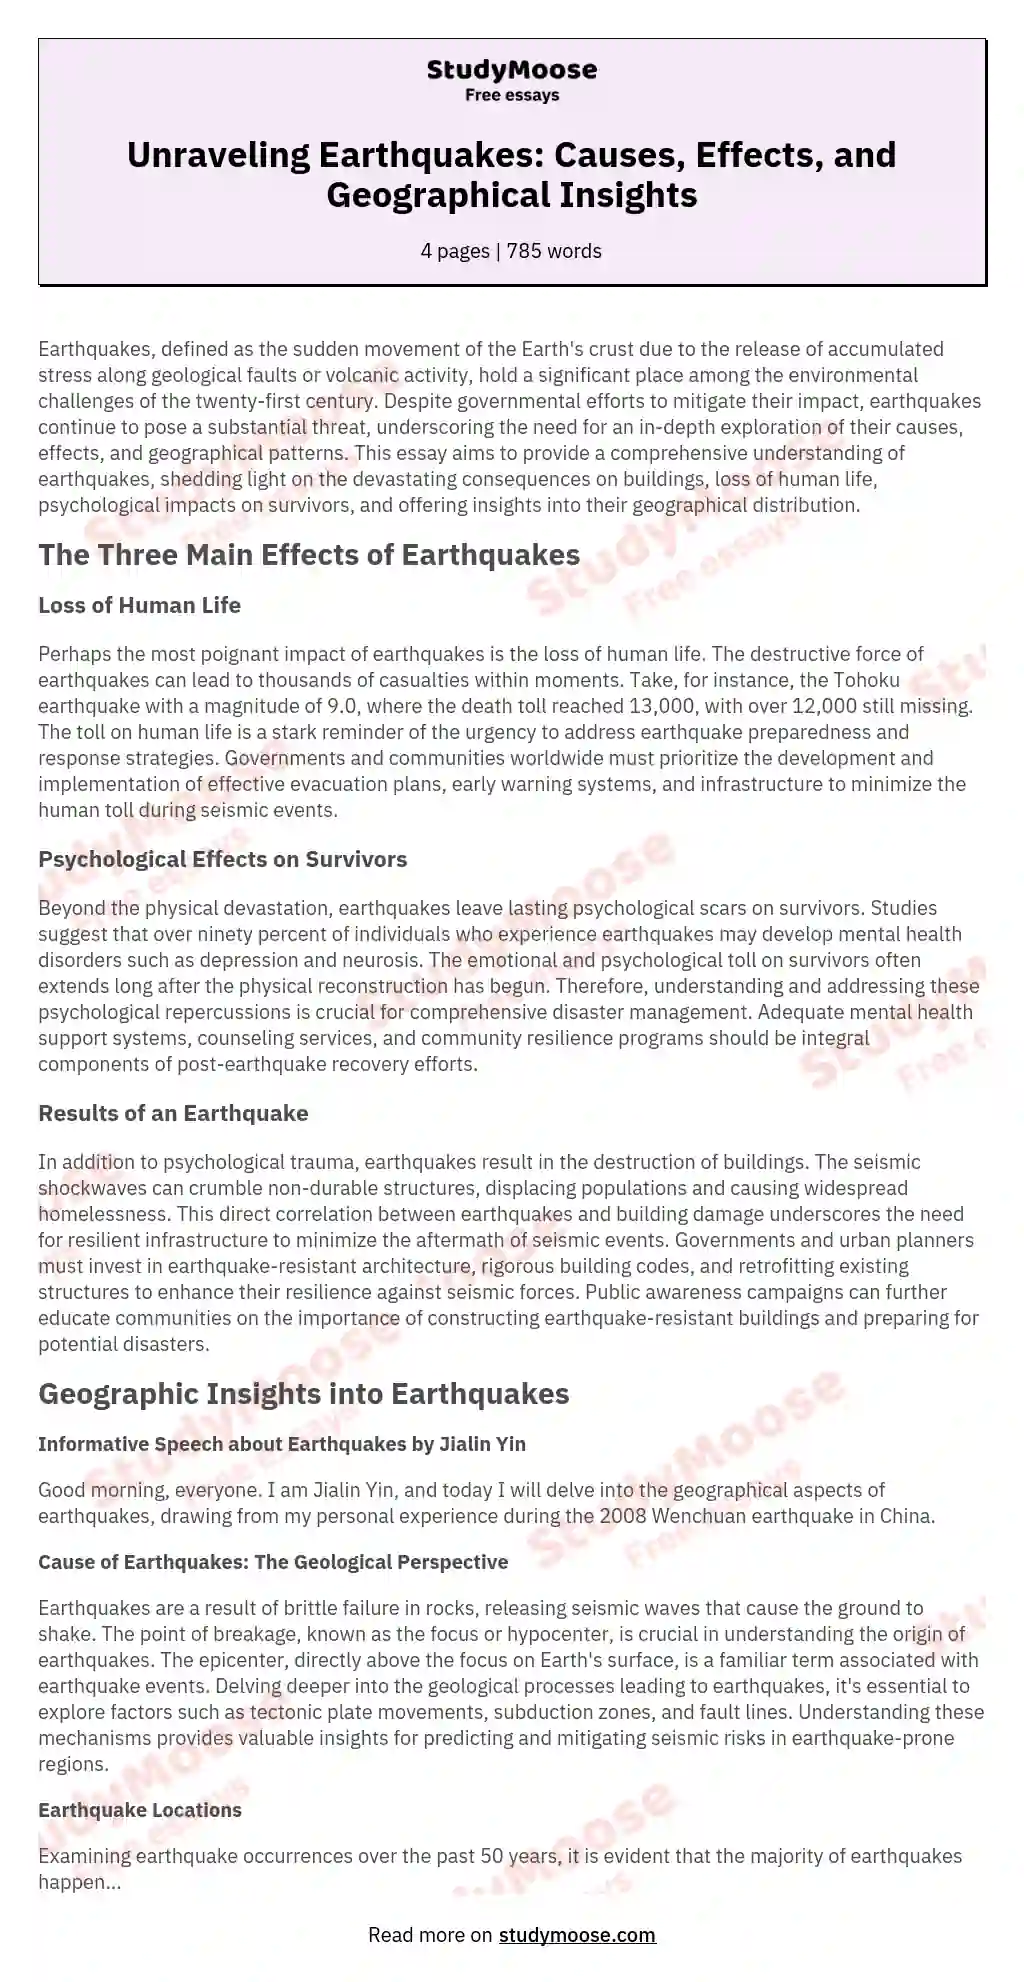 Unraveling Earthquakes: Causes, Effects, and Geographical Insights essay